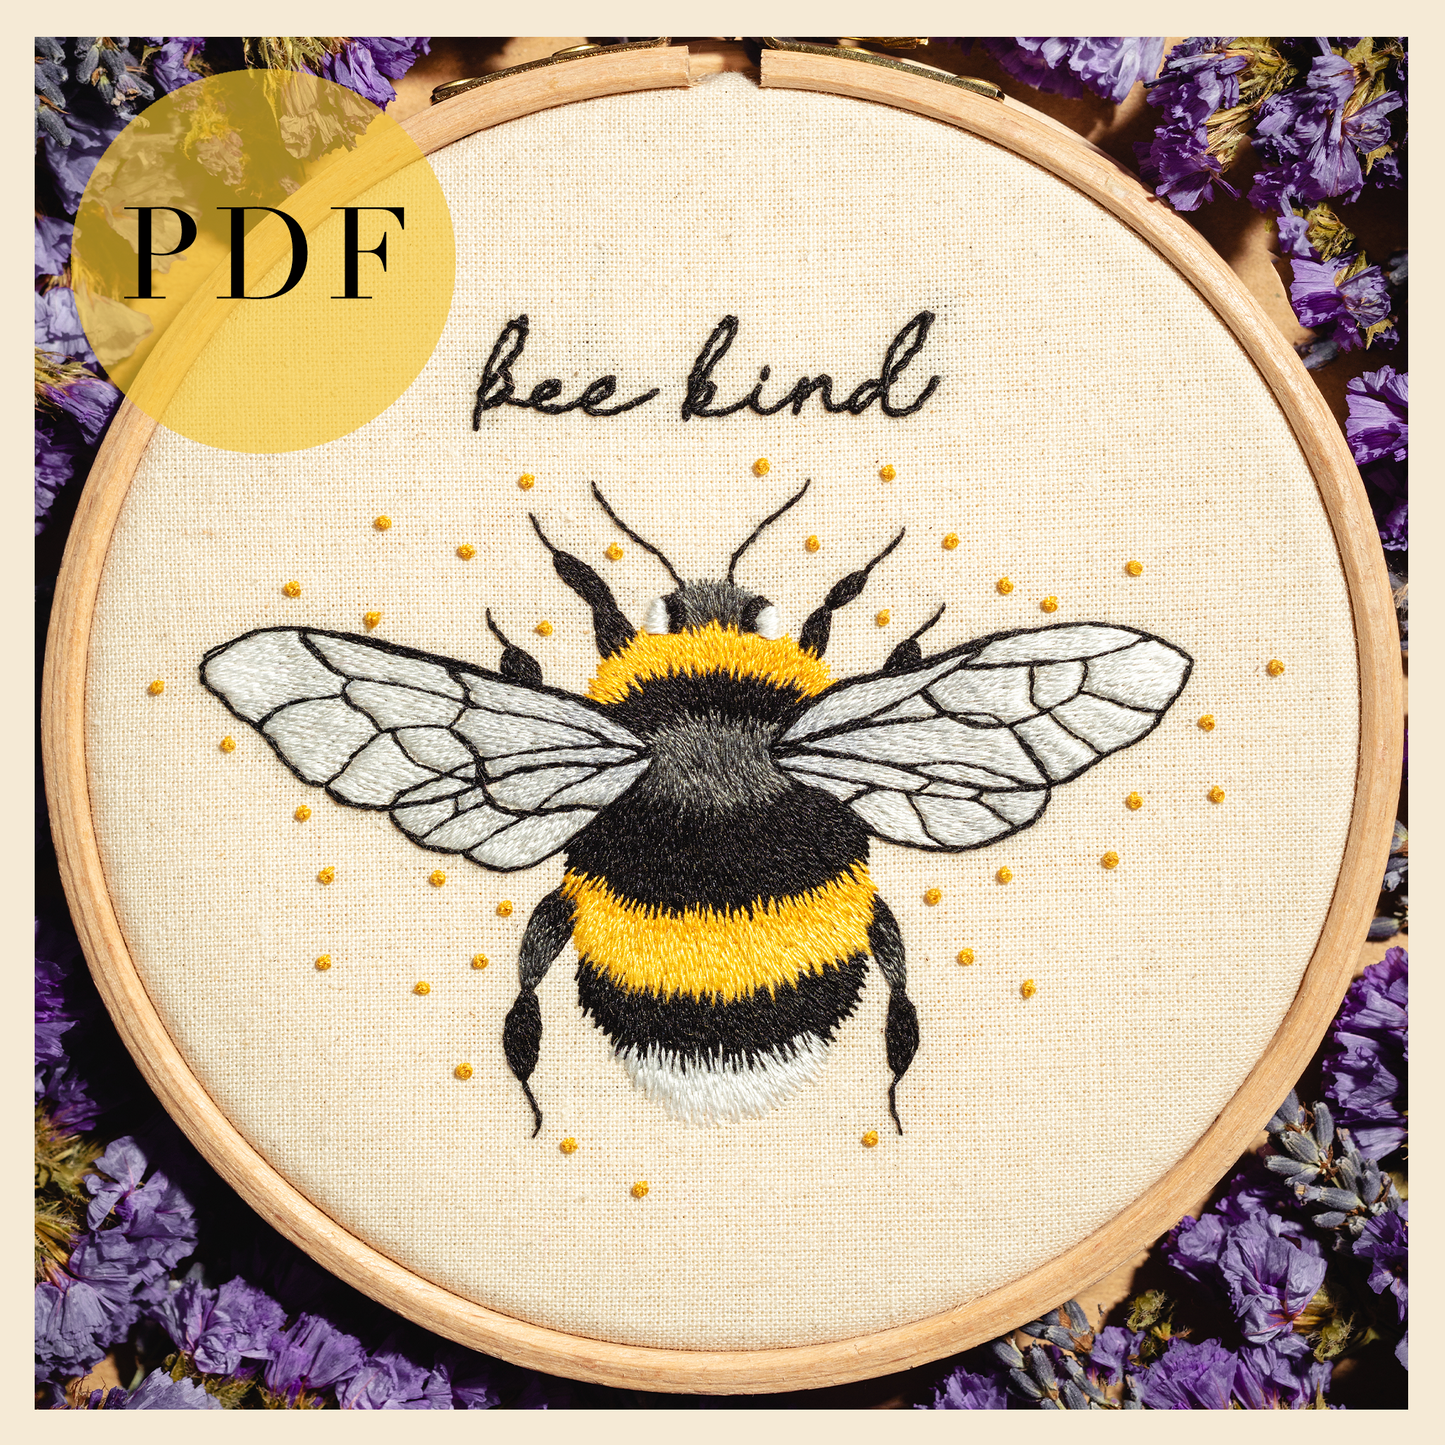 'The Mindful Bumblebee' - PDF Embroidery Pattern and Guide